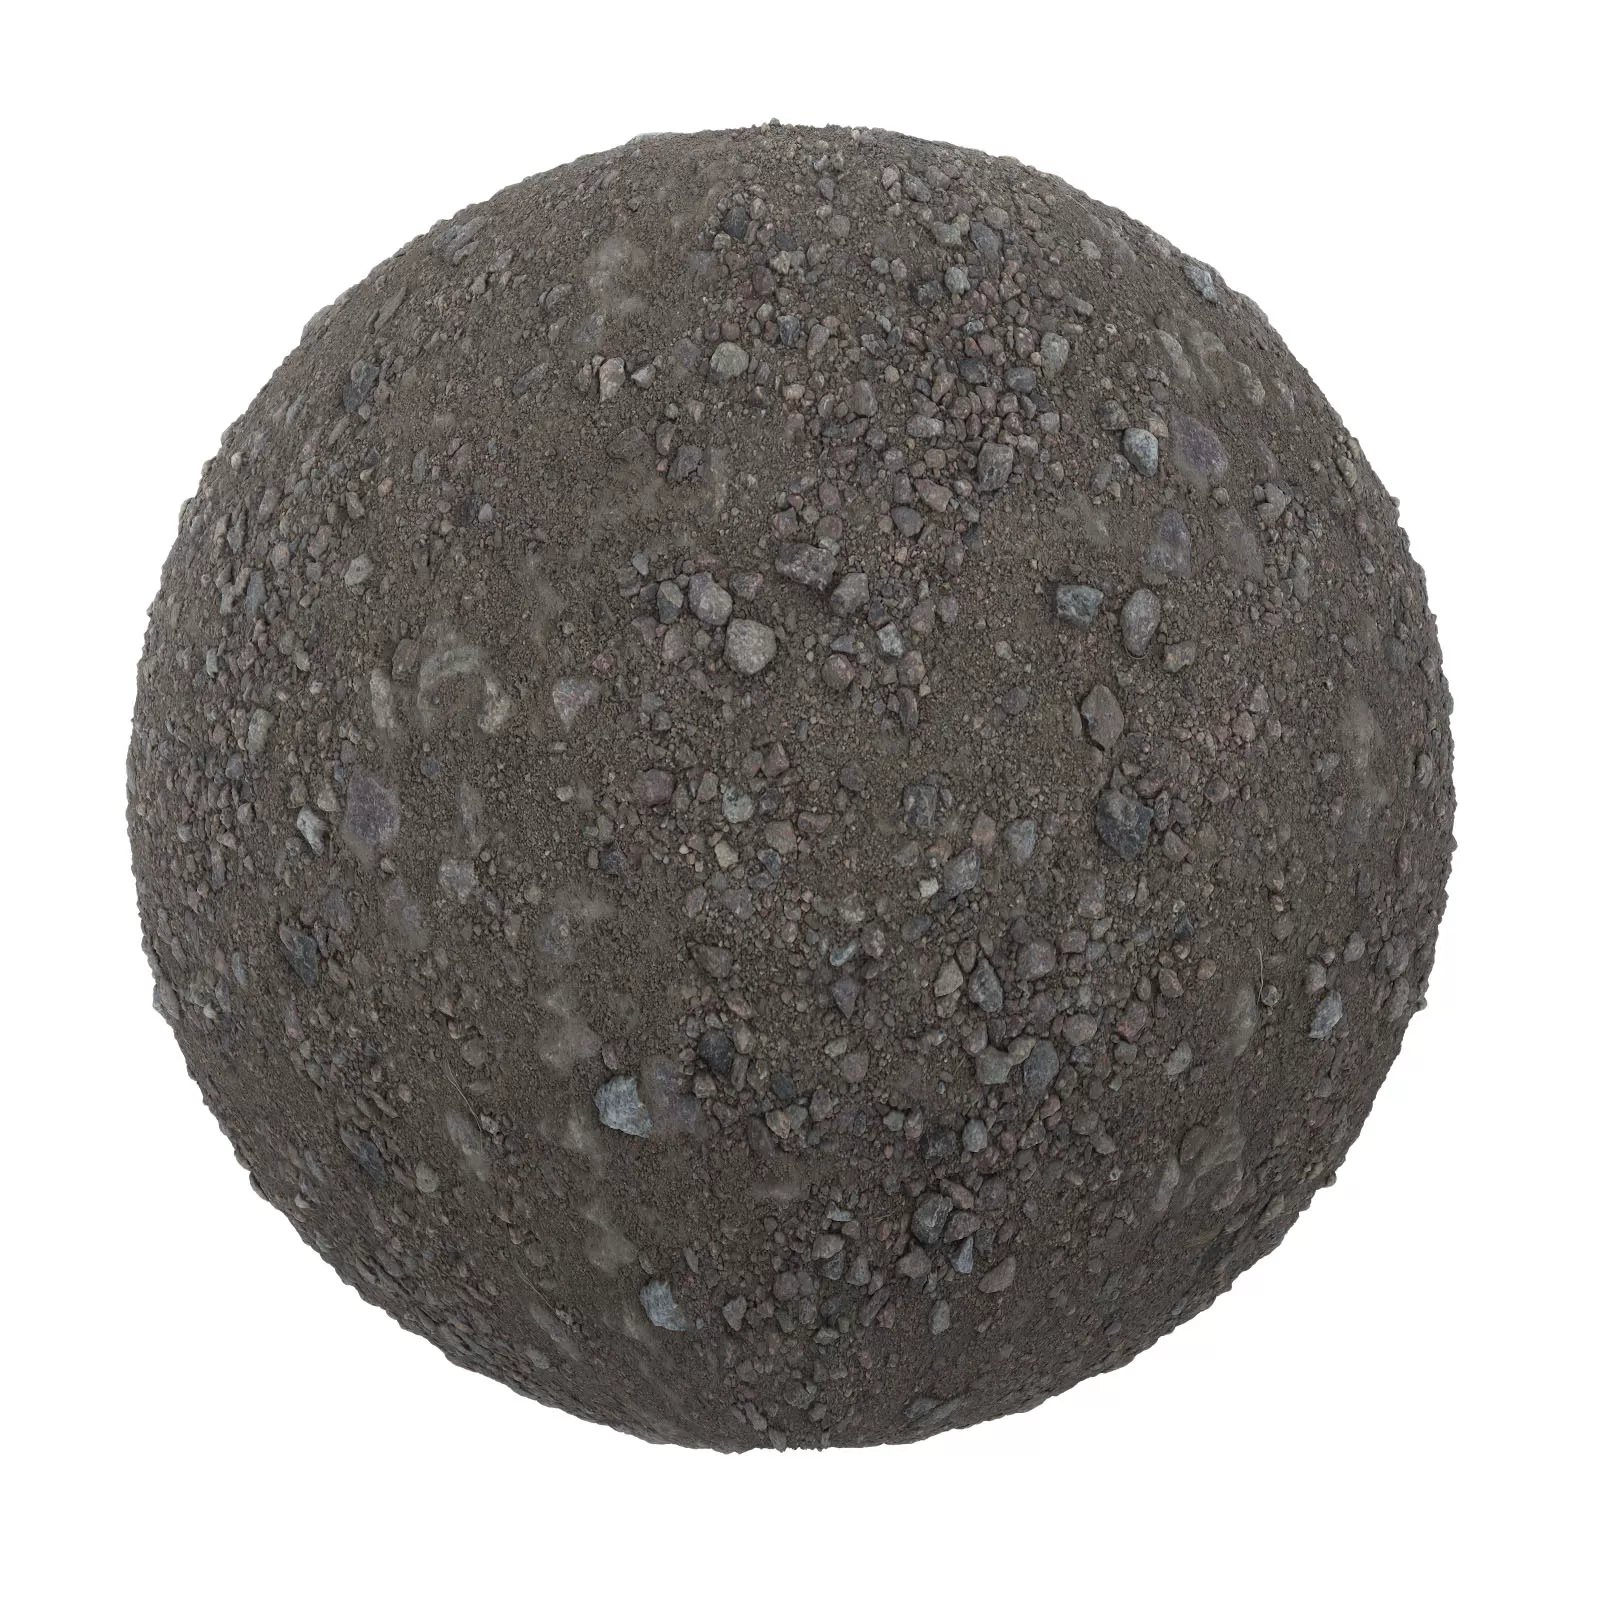 PBR CGAXIS TEXTURES – SOIL – Grey Dirt With Stones 6